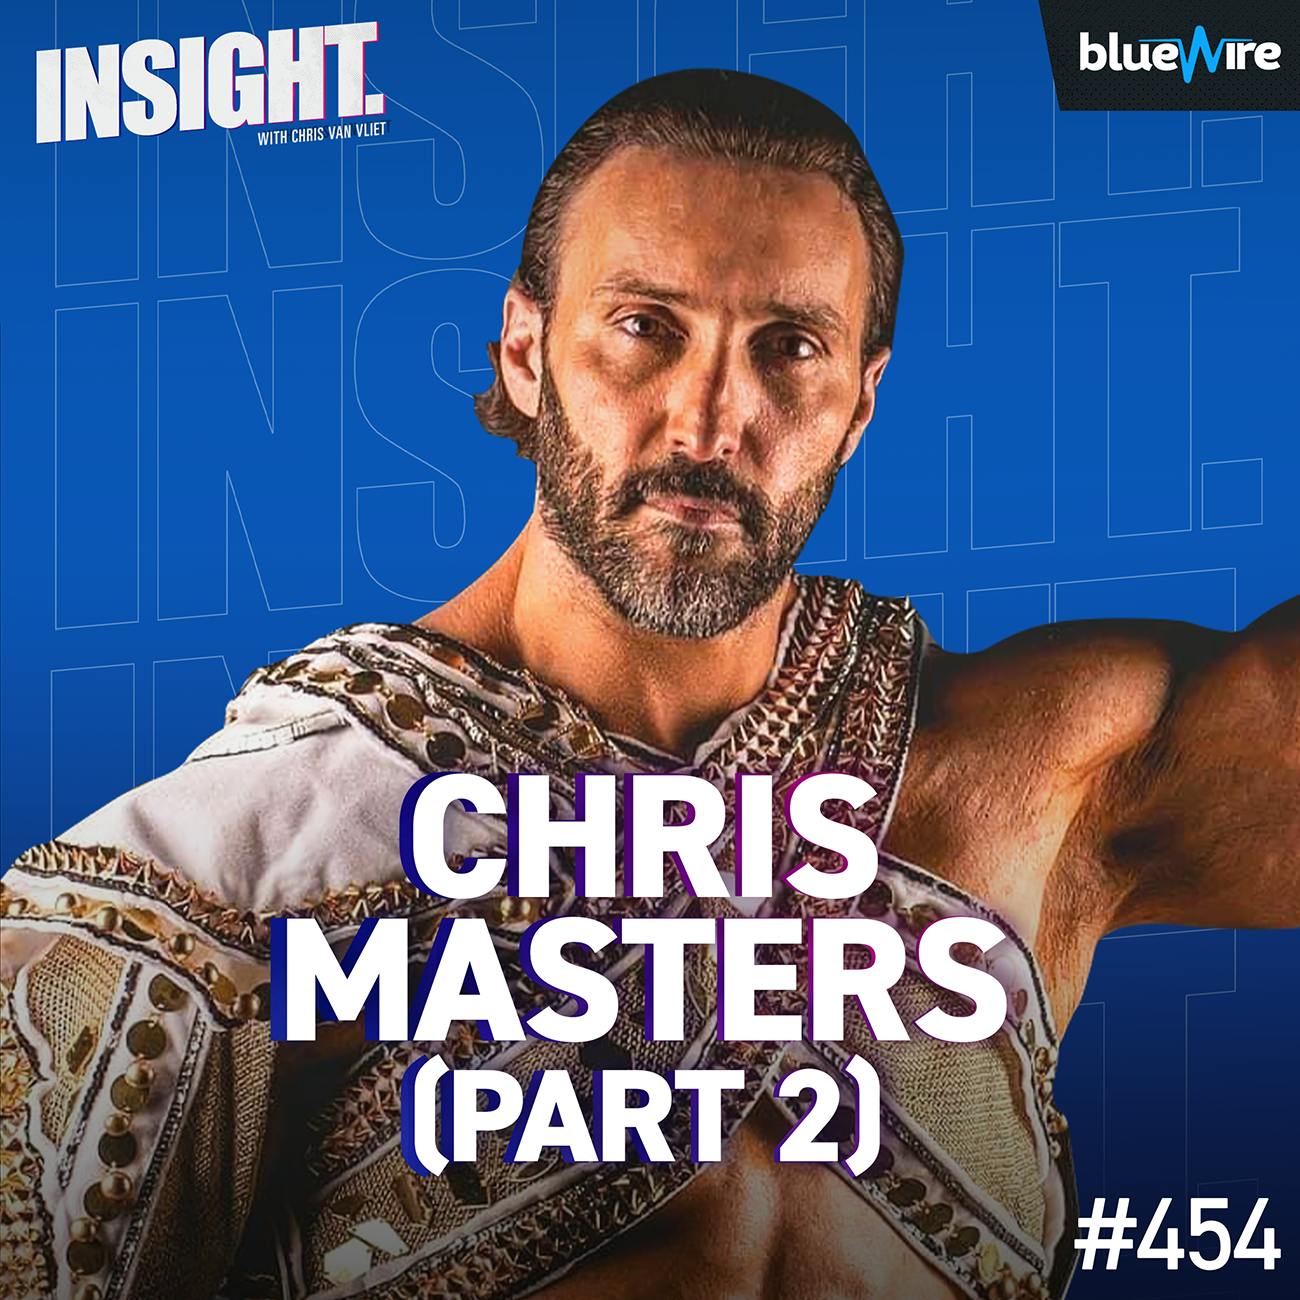 Chris Masters Saved His Mom From A Burning House, NWA Worlds Heavyweight Title Shot vs. Tyrus